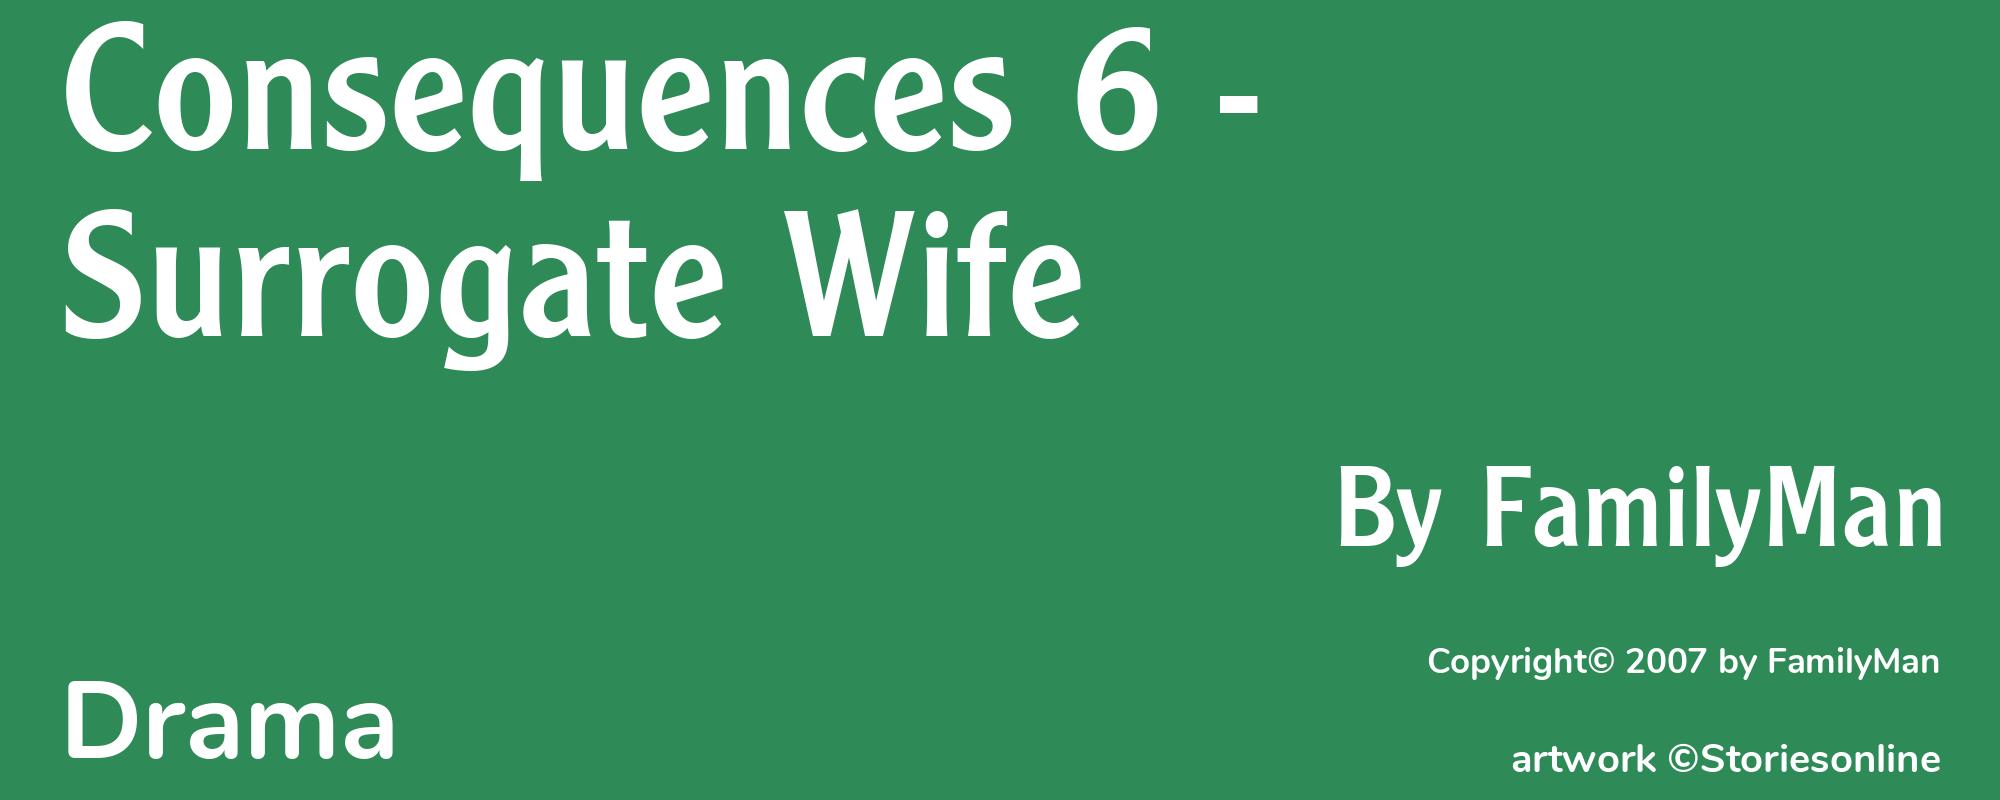 Consequences 6 - Surrogate Wife - Cover